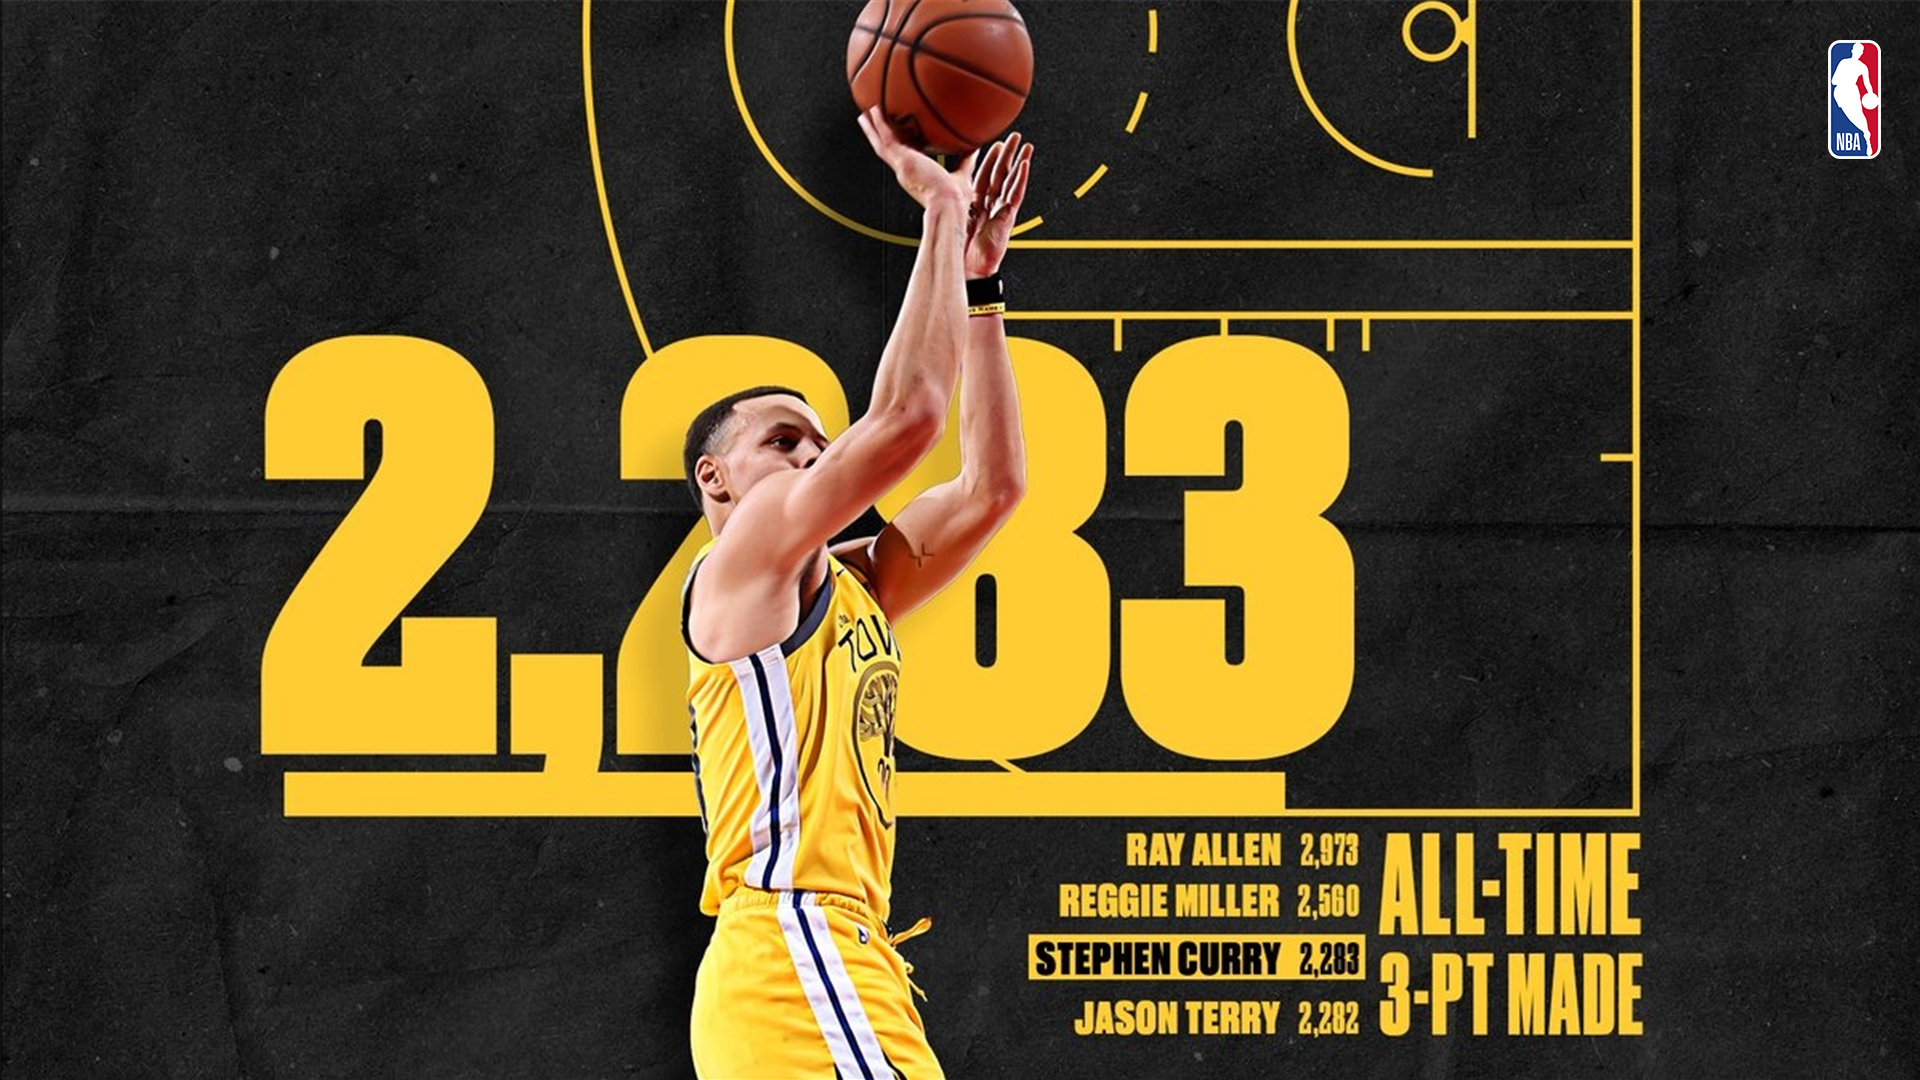 Steph Curry moves into 3rd on NBA's all-time 3PM list in Warriors' blowout win ...1920 x 1080